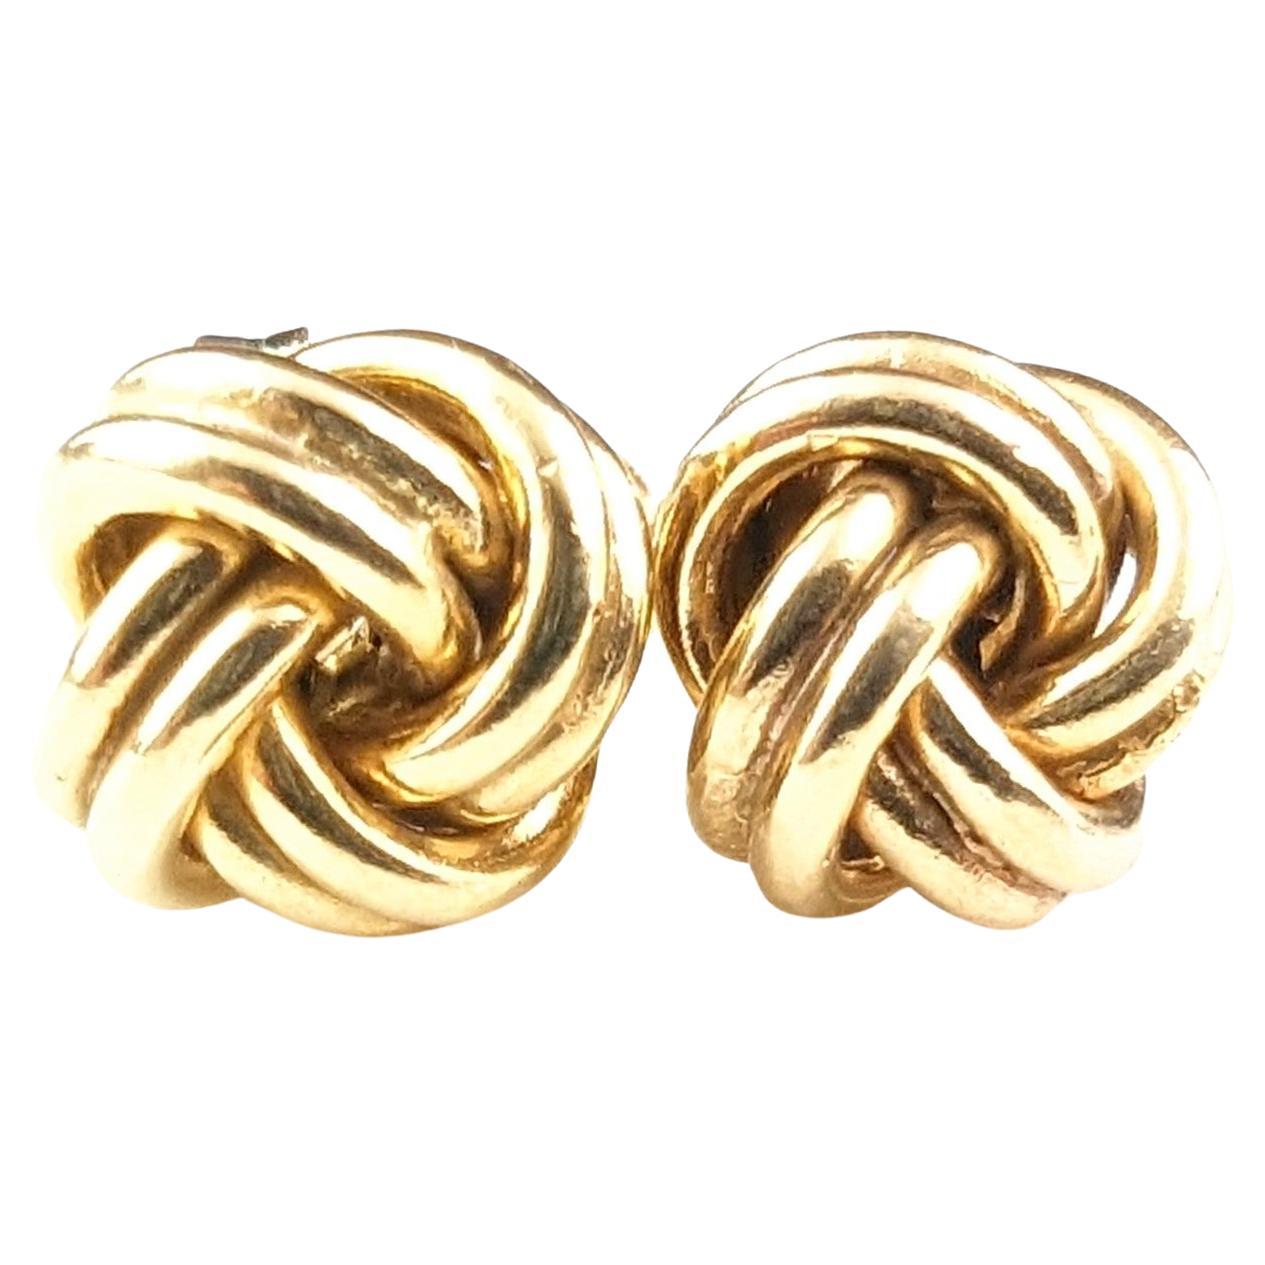 Vintage 9k yellow gold knot earrings, studs 